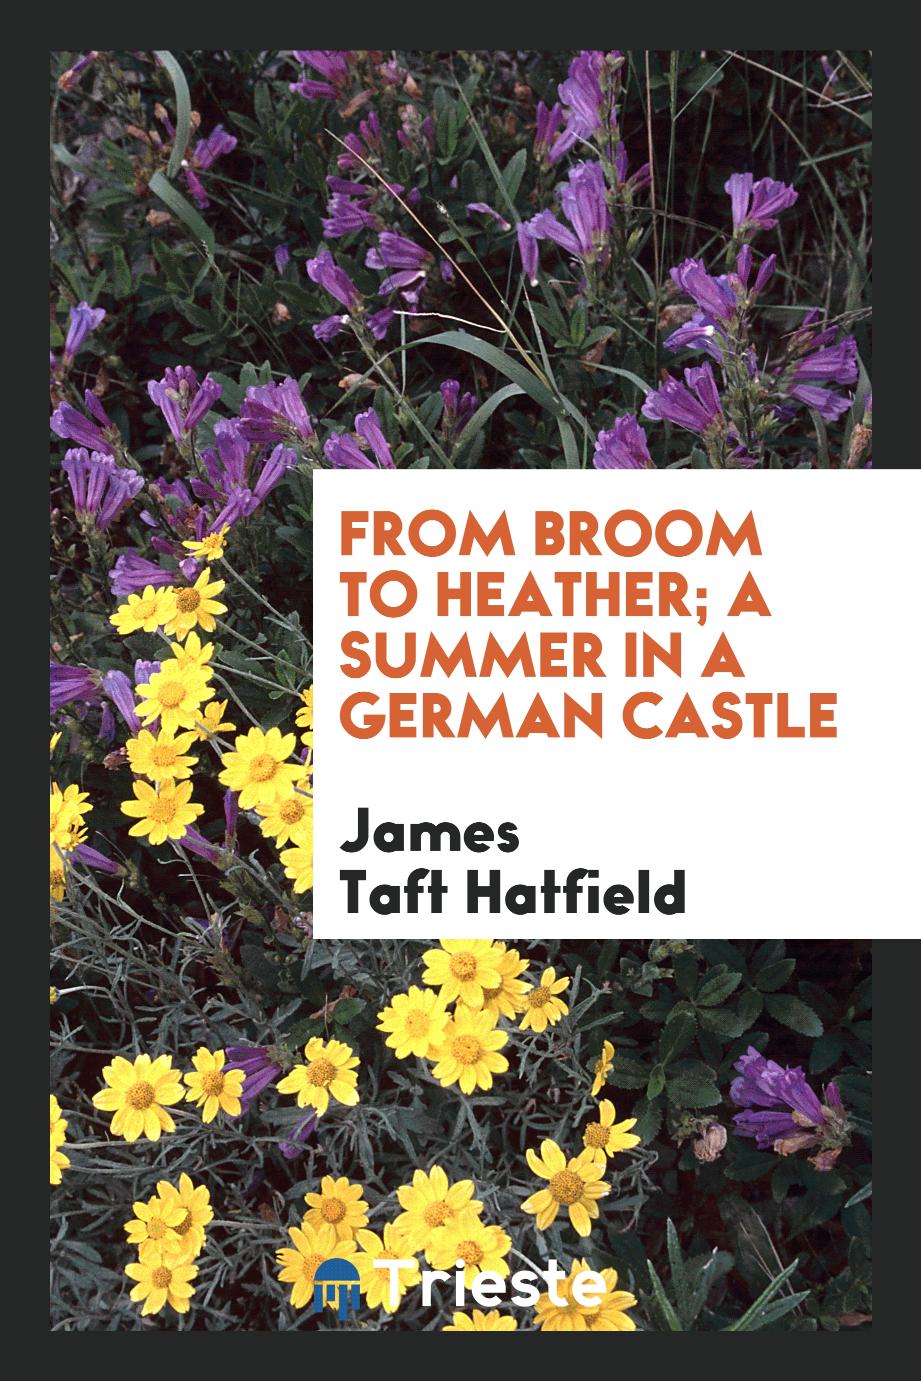 From broom to heather; a summer in a German castle